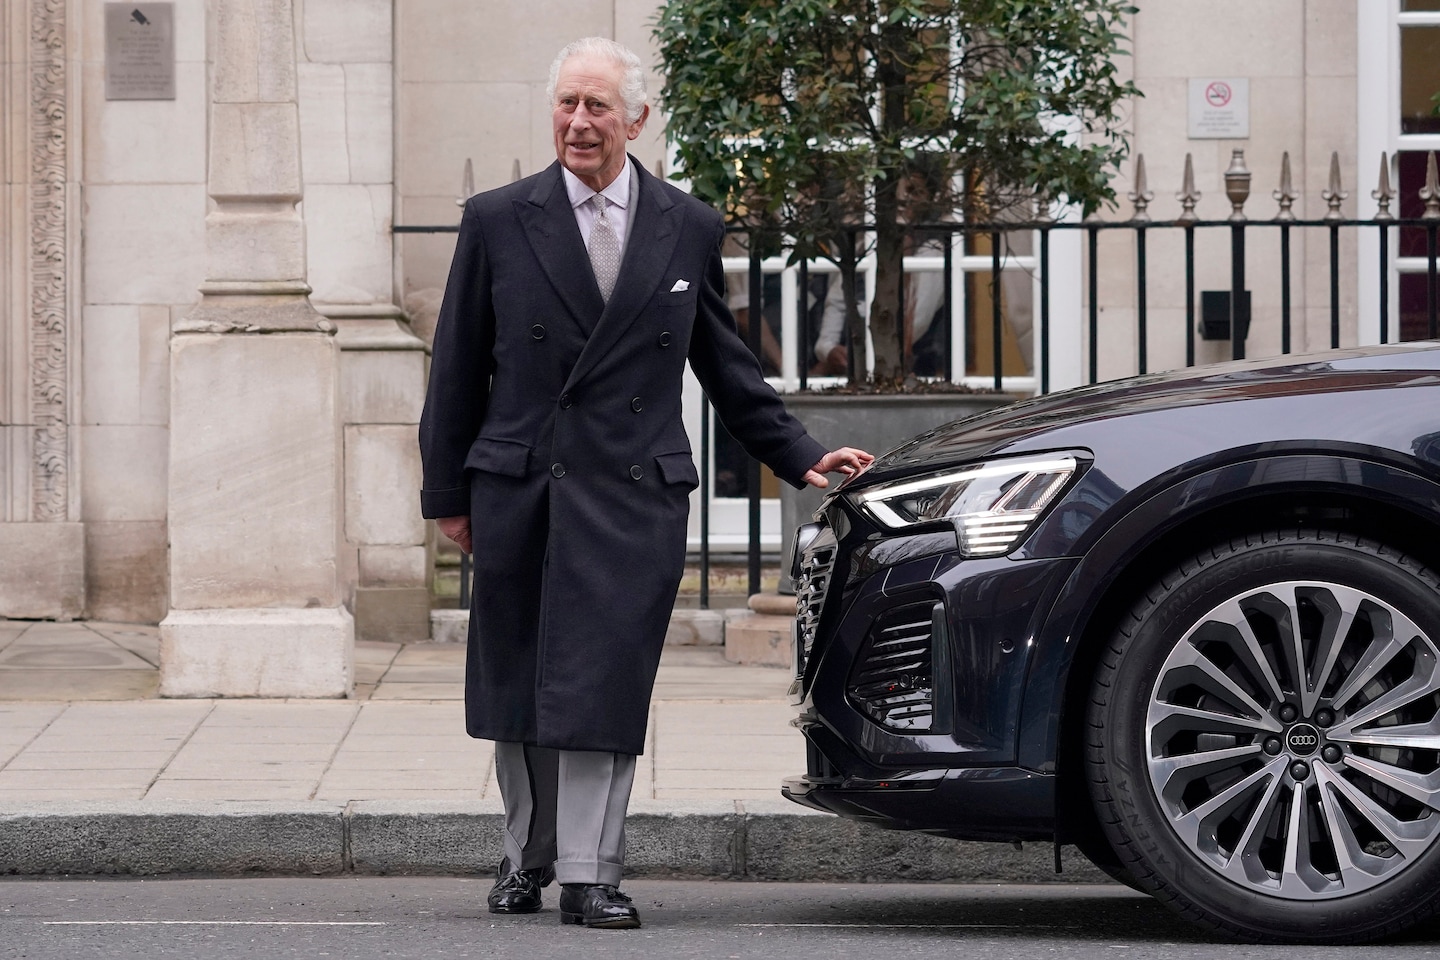 King Charles III’s cancer was caught early. Many Brits aren’t so lucky.